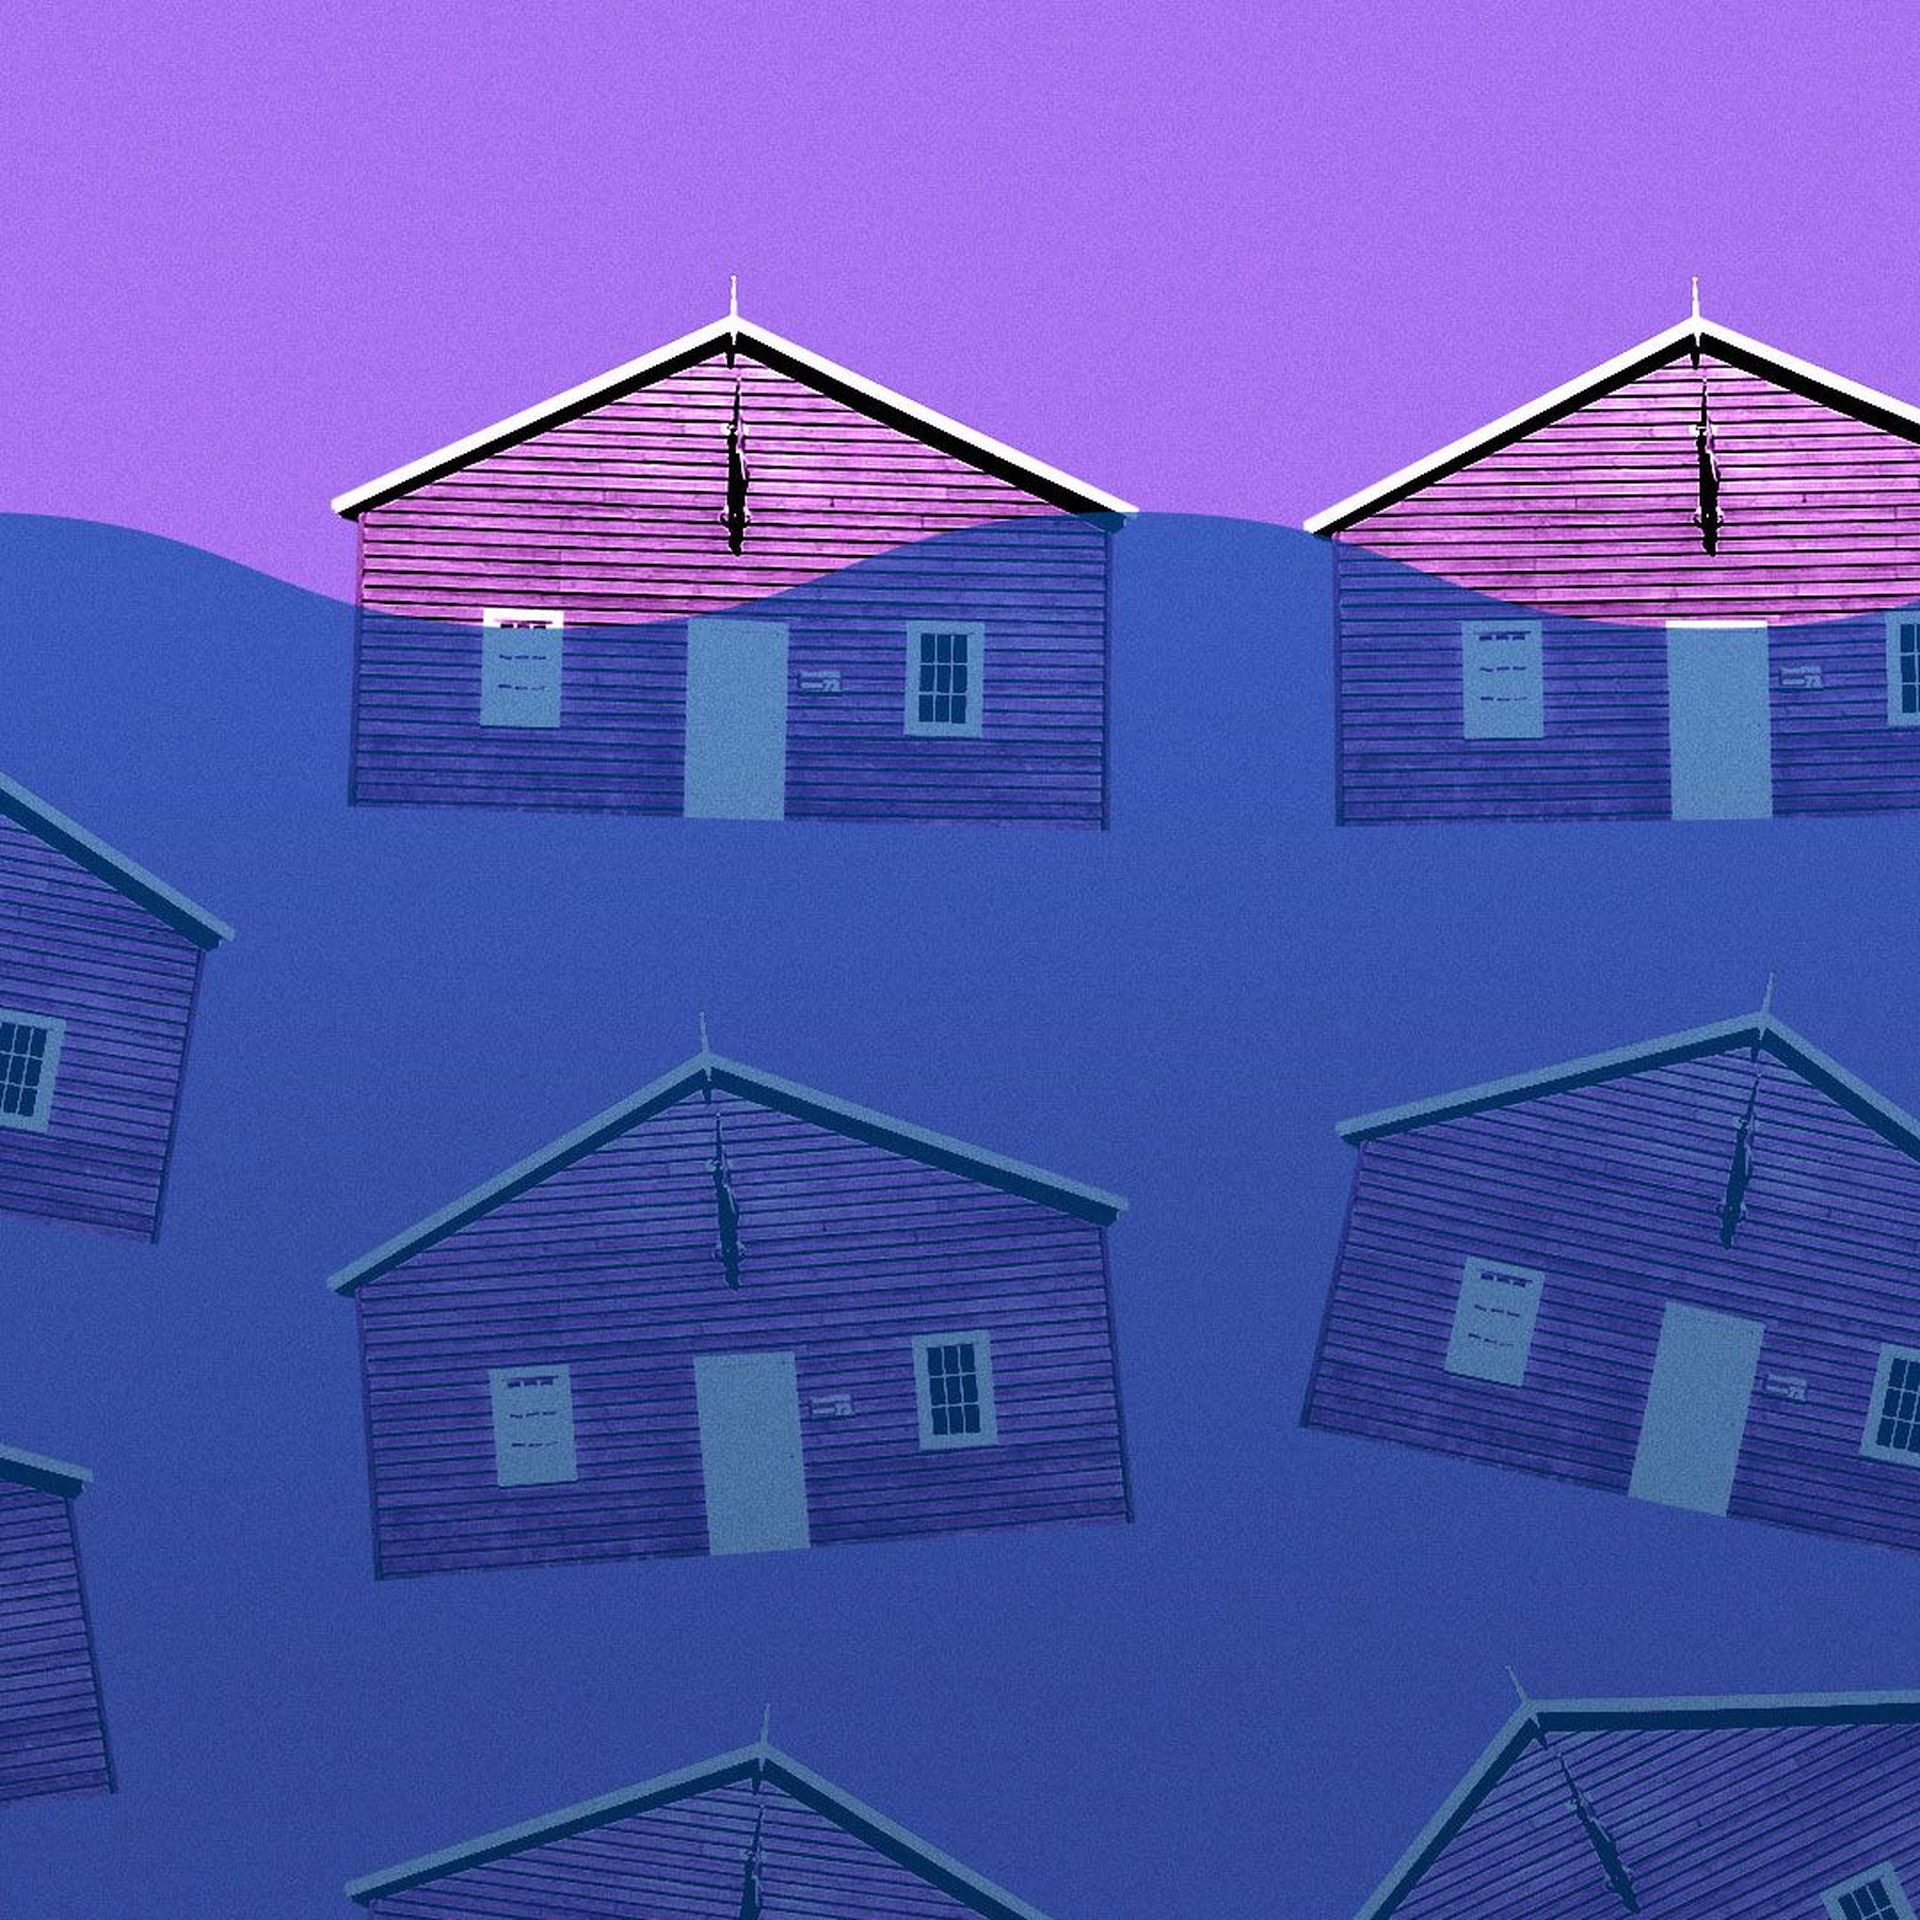 Illustration of pattern of houses partially submerged under water